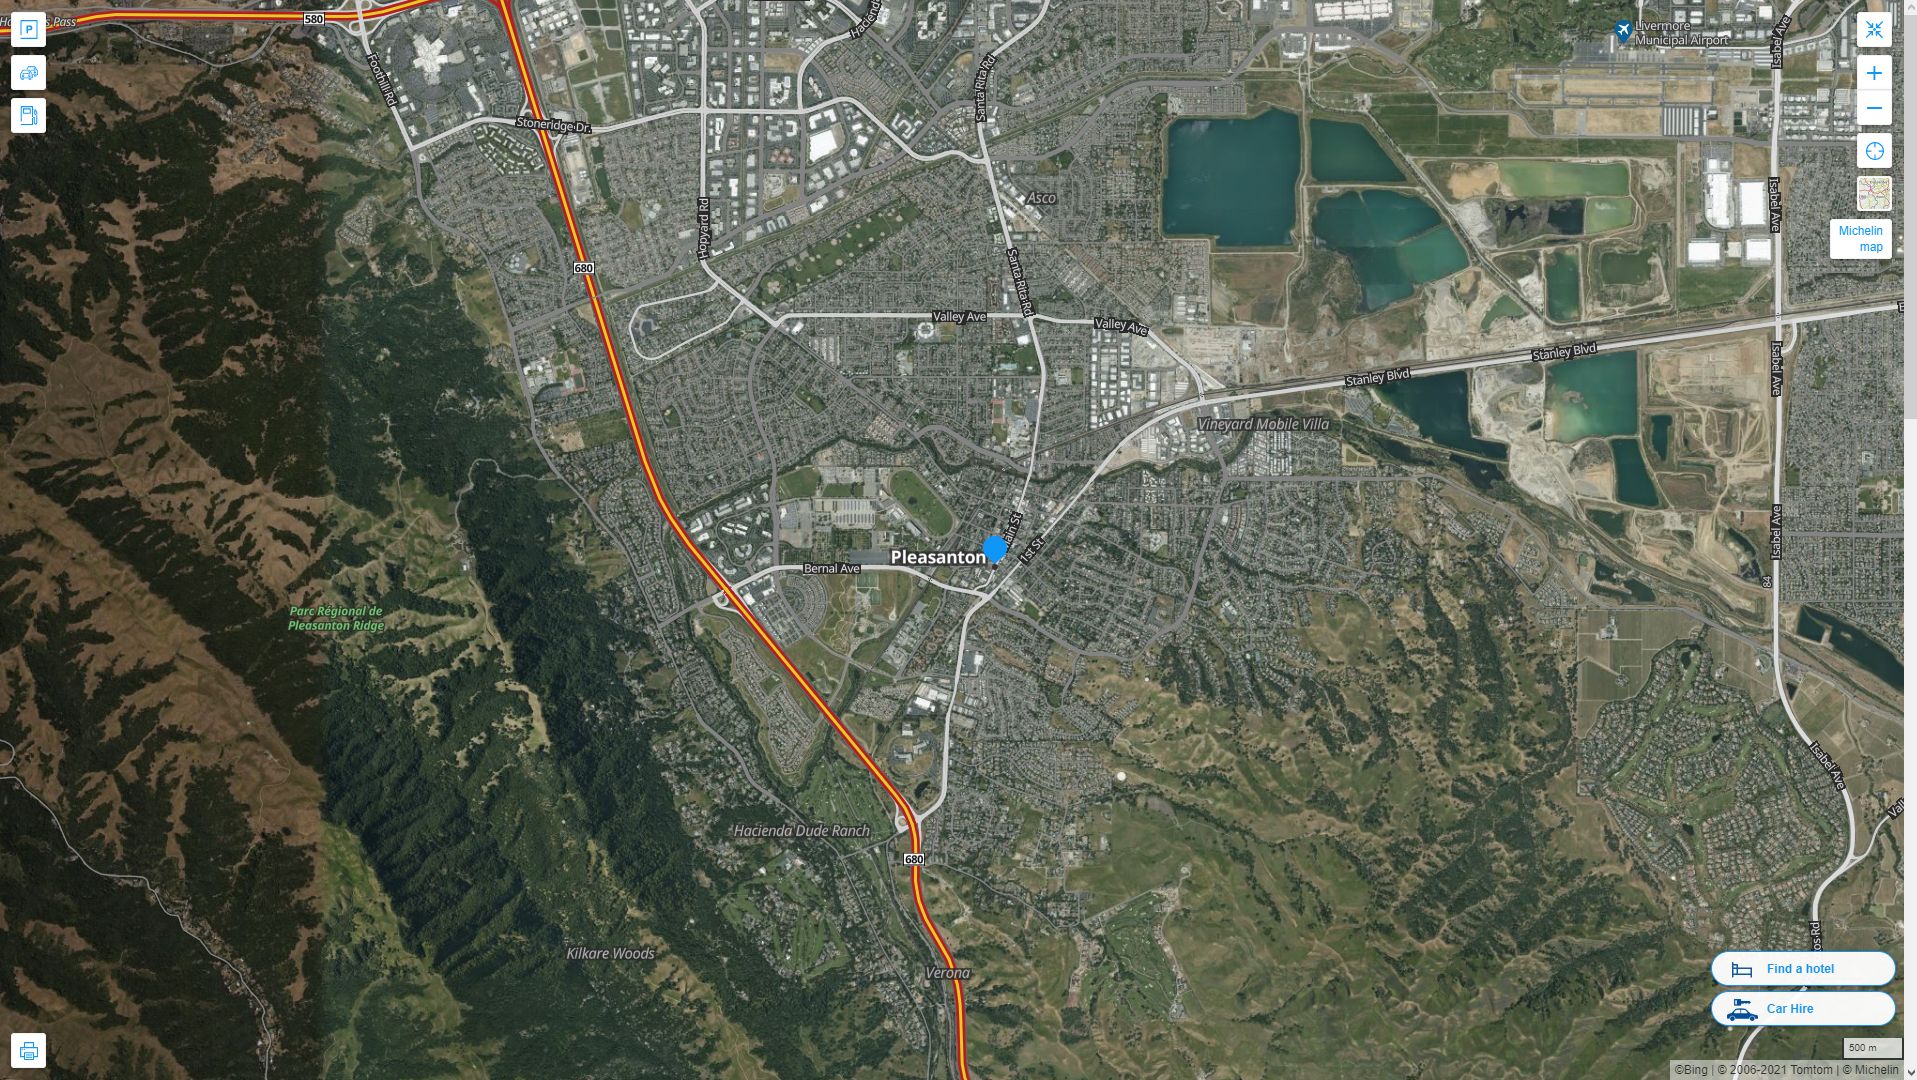 Pleasanton California Highway and Road Map with Satellite View